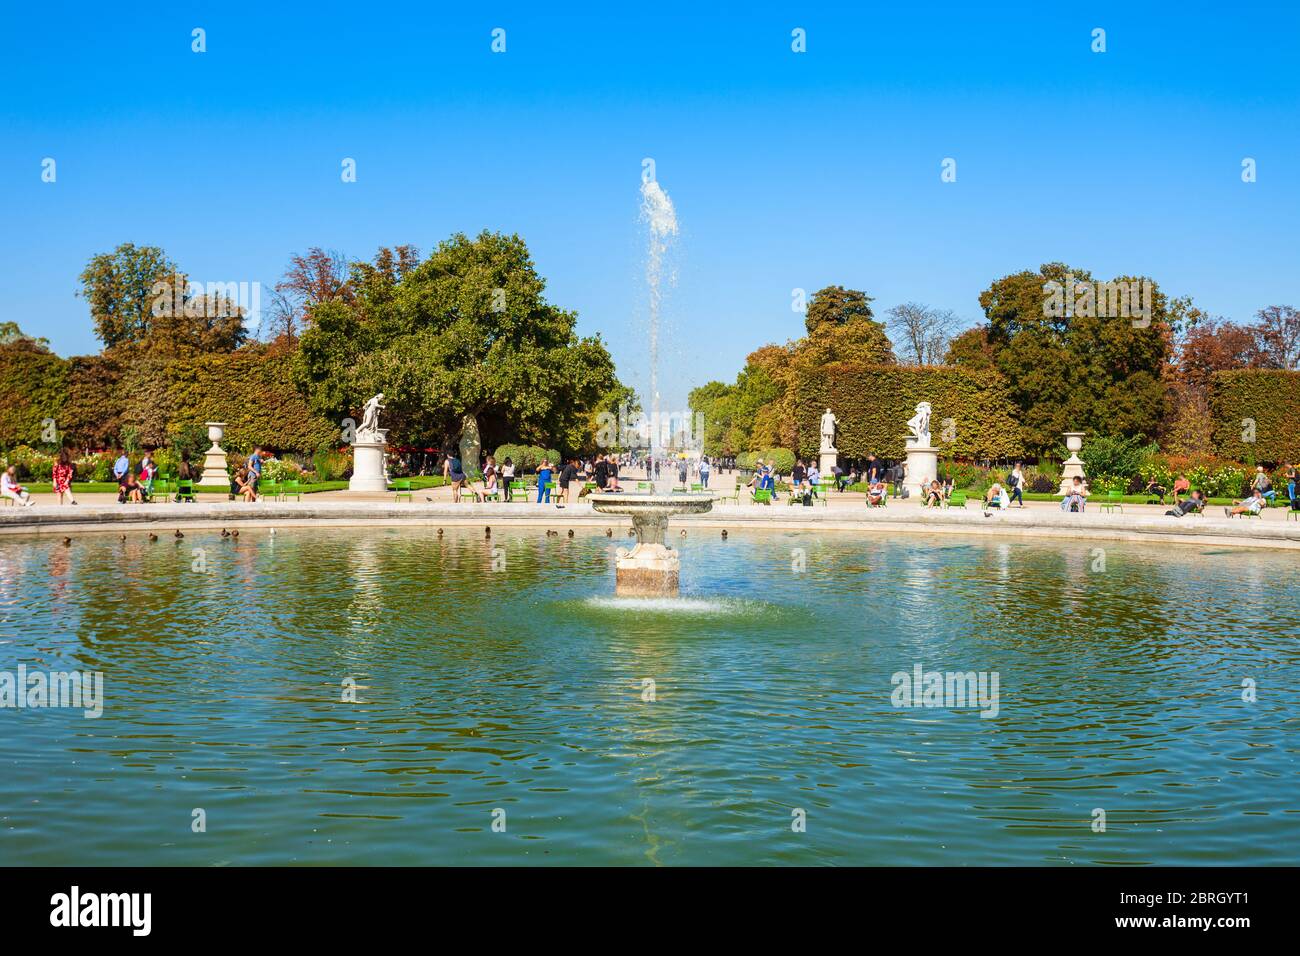 Tuileries Garden or Jardin des Tuileries is a public garden located near the Louvre in Paris, France Stock Photo